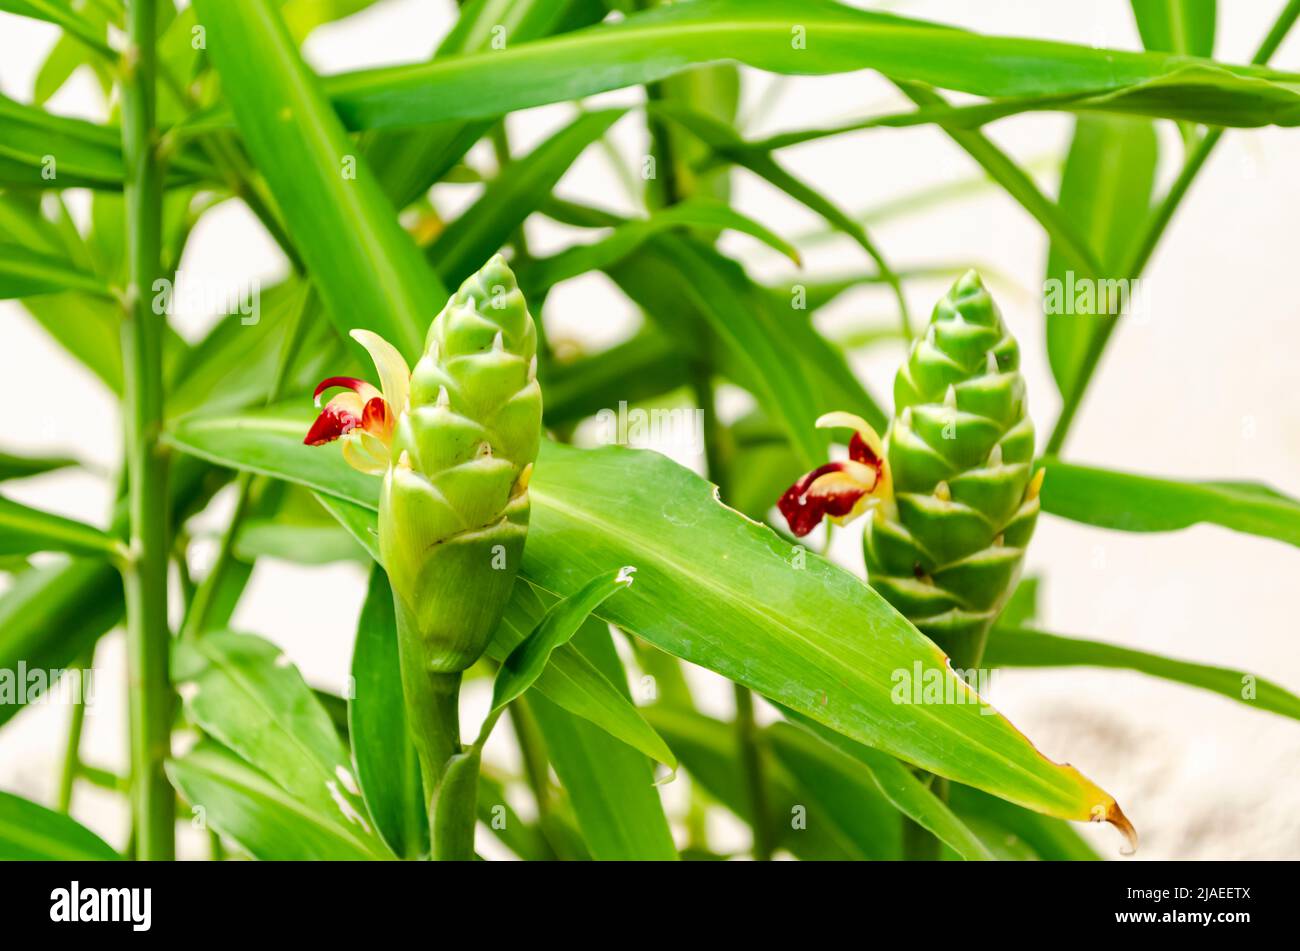 The ginger plant blooms small red and yellow flowers on an elongated flower head. Stock Photo